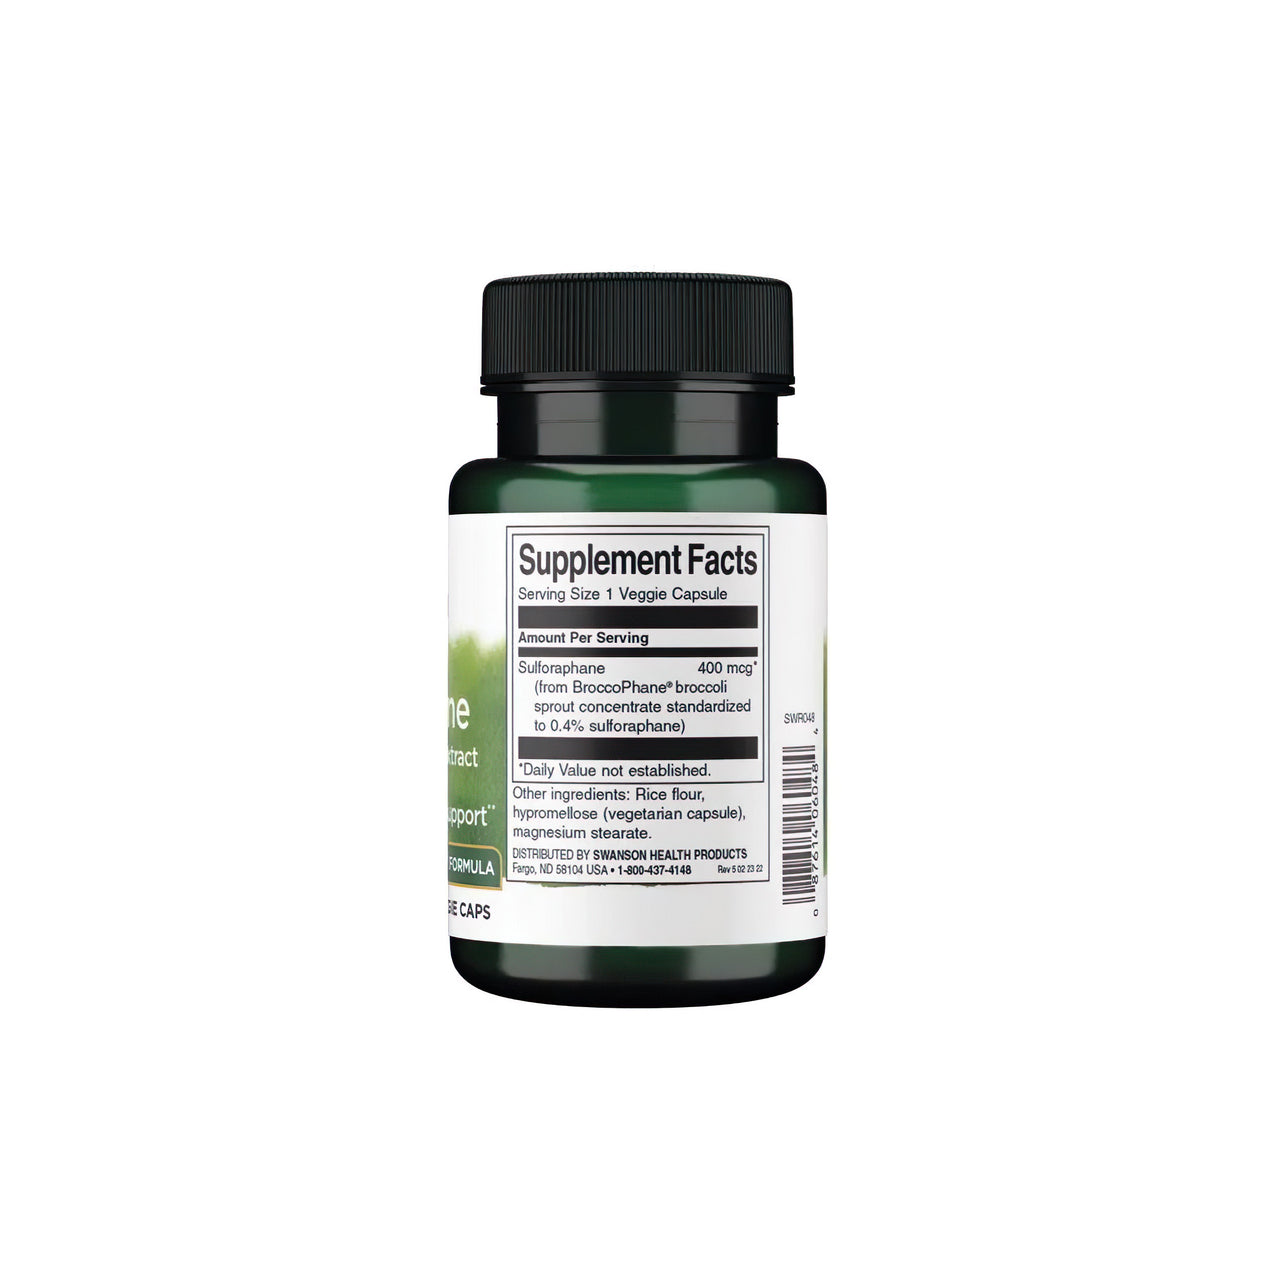 A bottle of Swanson health supplements containing Sulforaphane from Broccoli Sprout Extract, detailing the supplement facts and ingredients on the label.